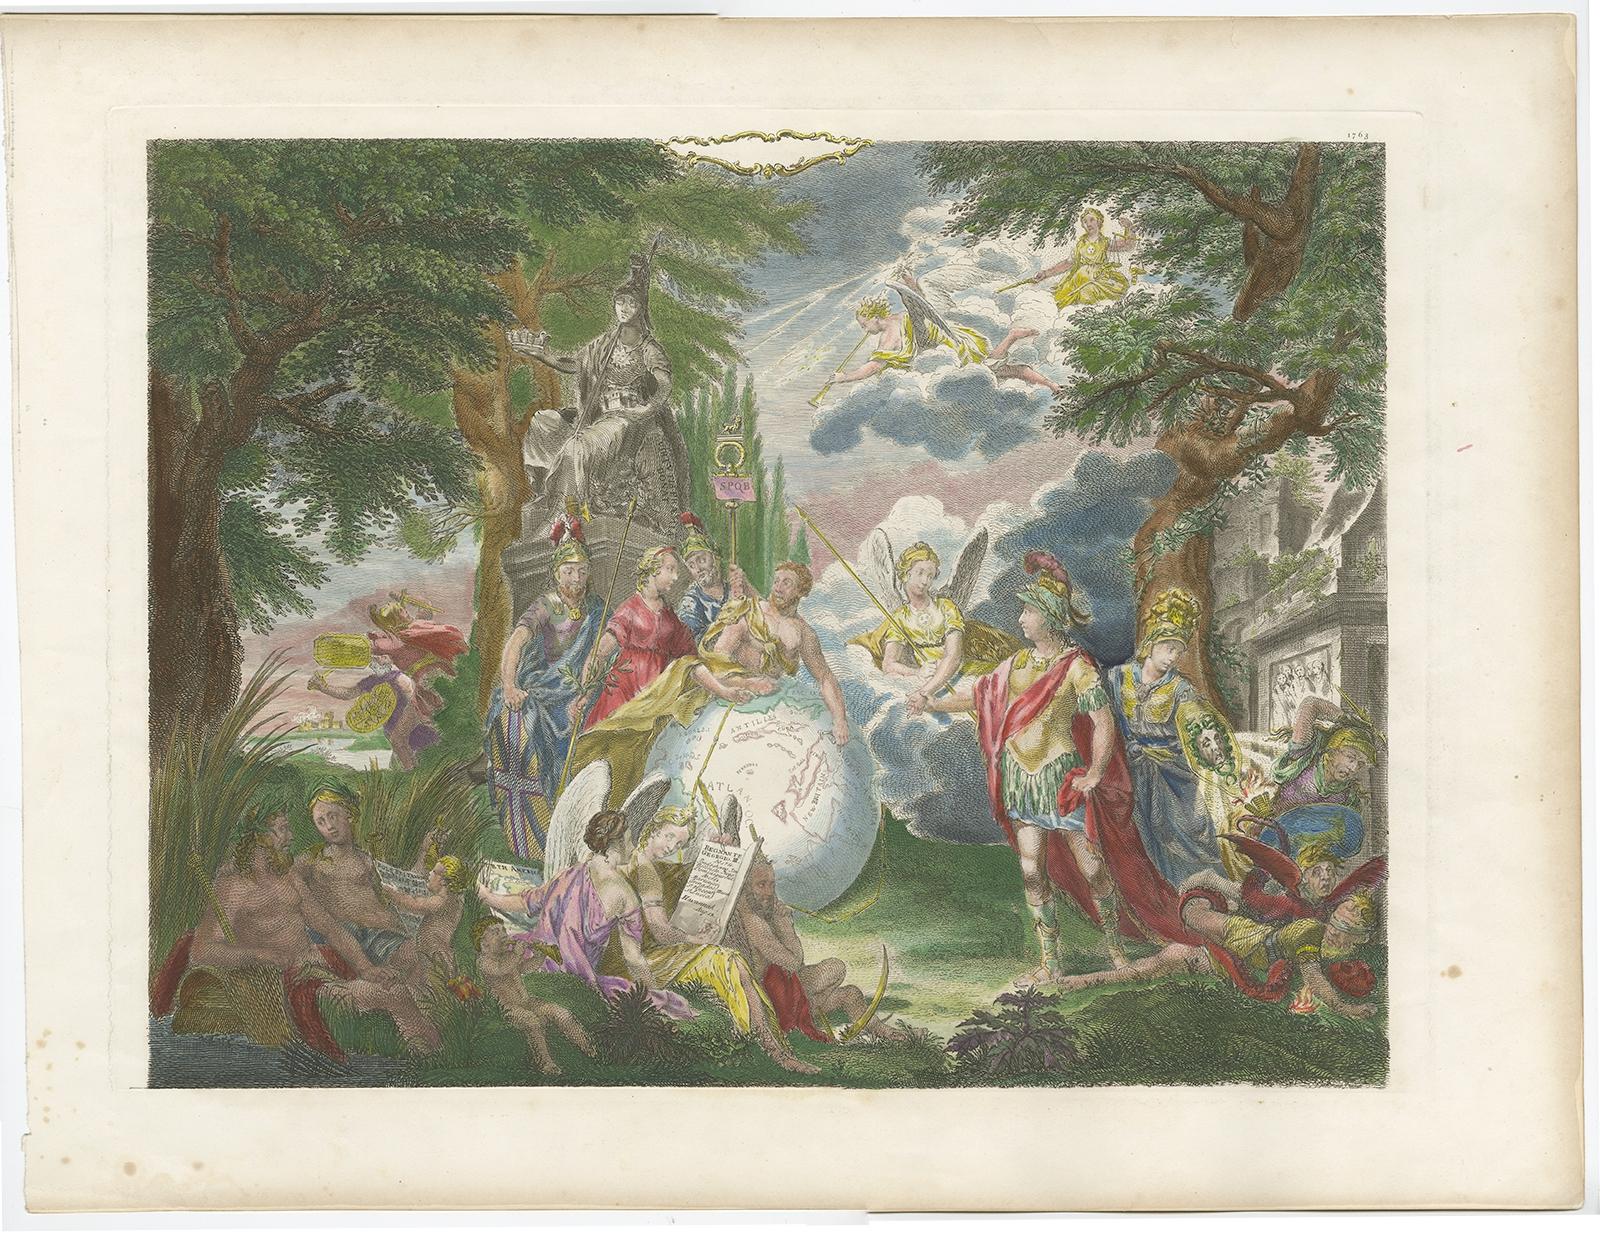 Antique print, untitled. Wonderful allegorical antique hand colored engraving depicting the celebrations of the British victories in America at the conclusion of the French & Indian (Seven Years) War after J. Miller (1763). 

The print includes